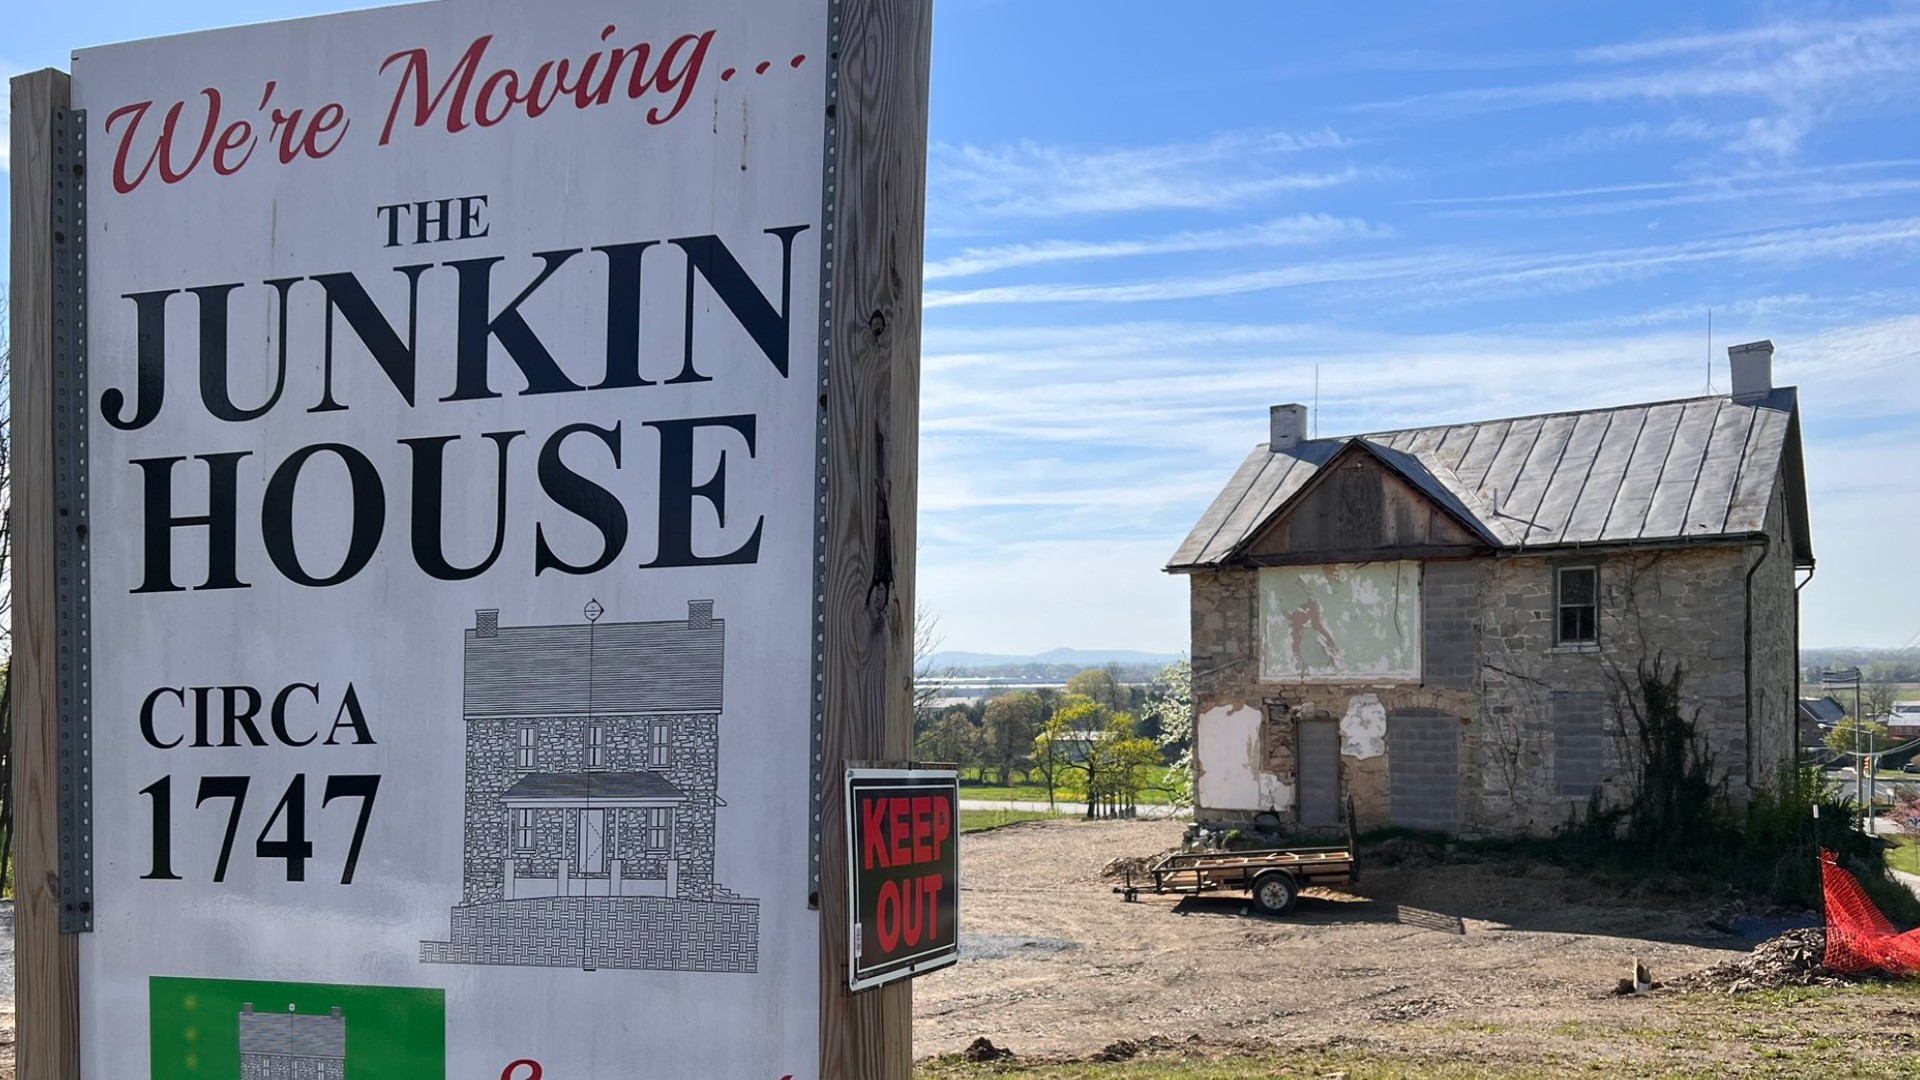 The Junkin House was built on North Locust Point Road in 1747, making it possibly the oldest building in Silver Spring Township.